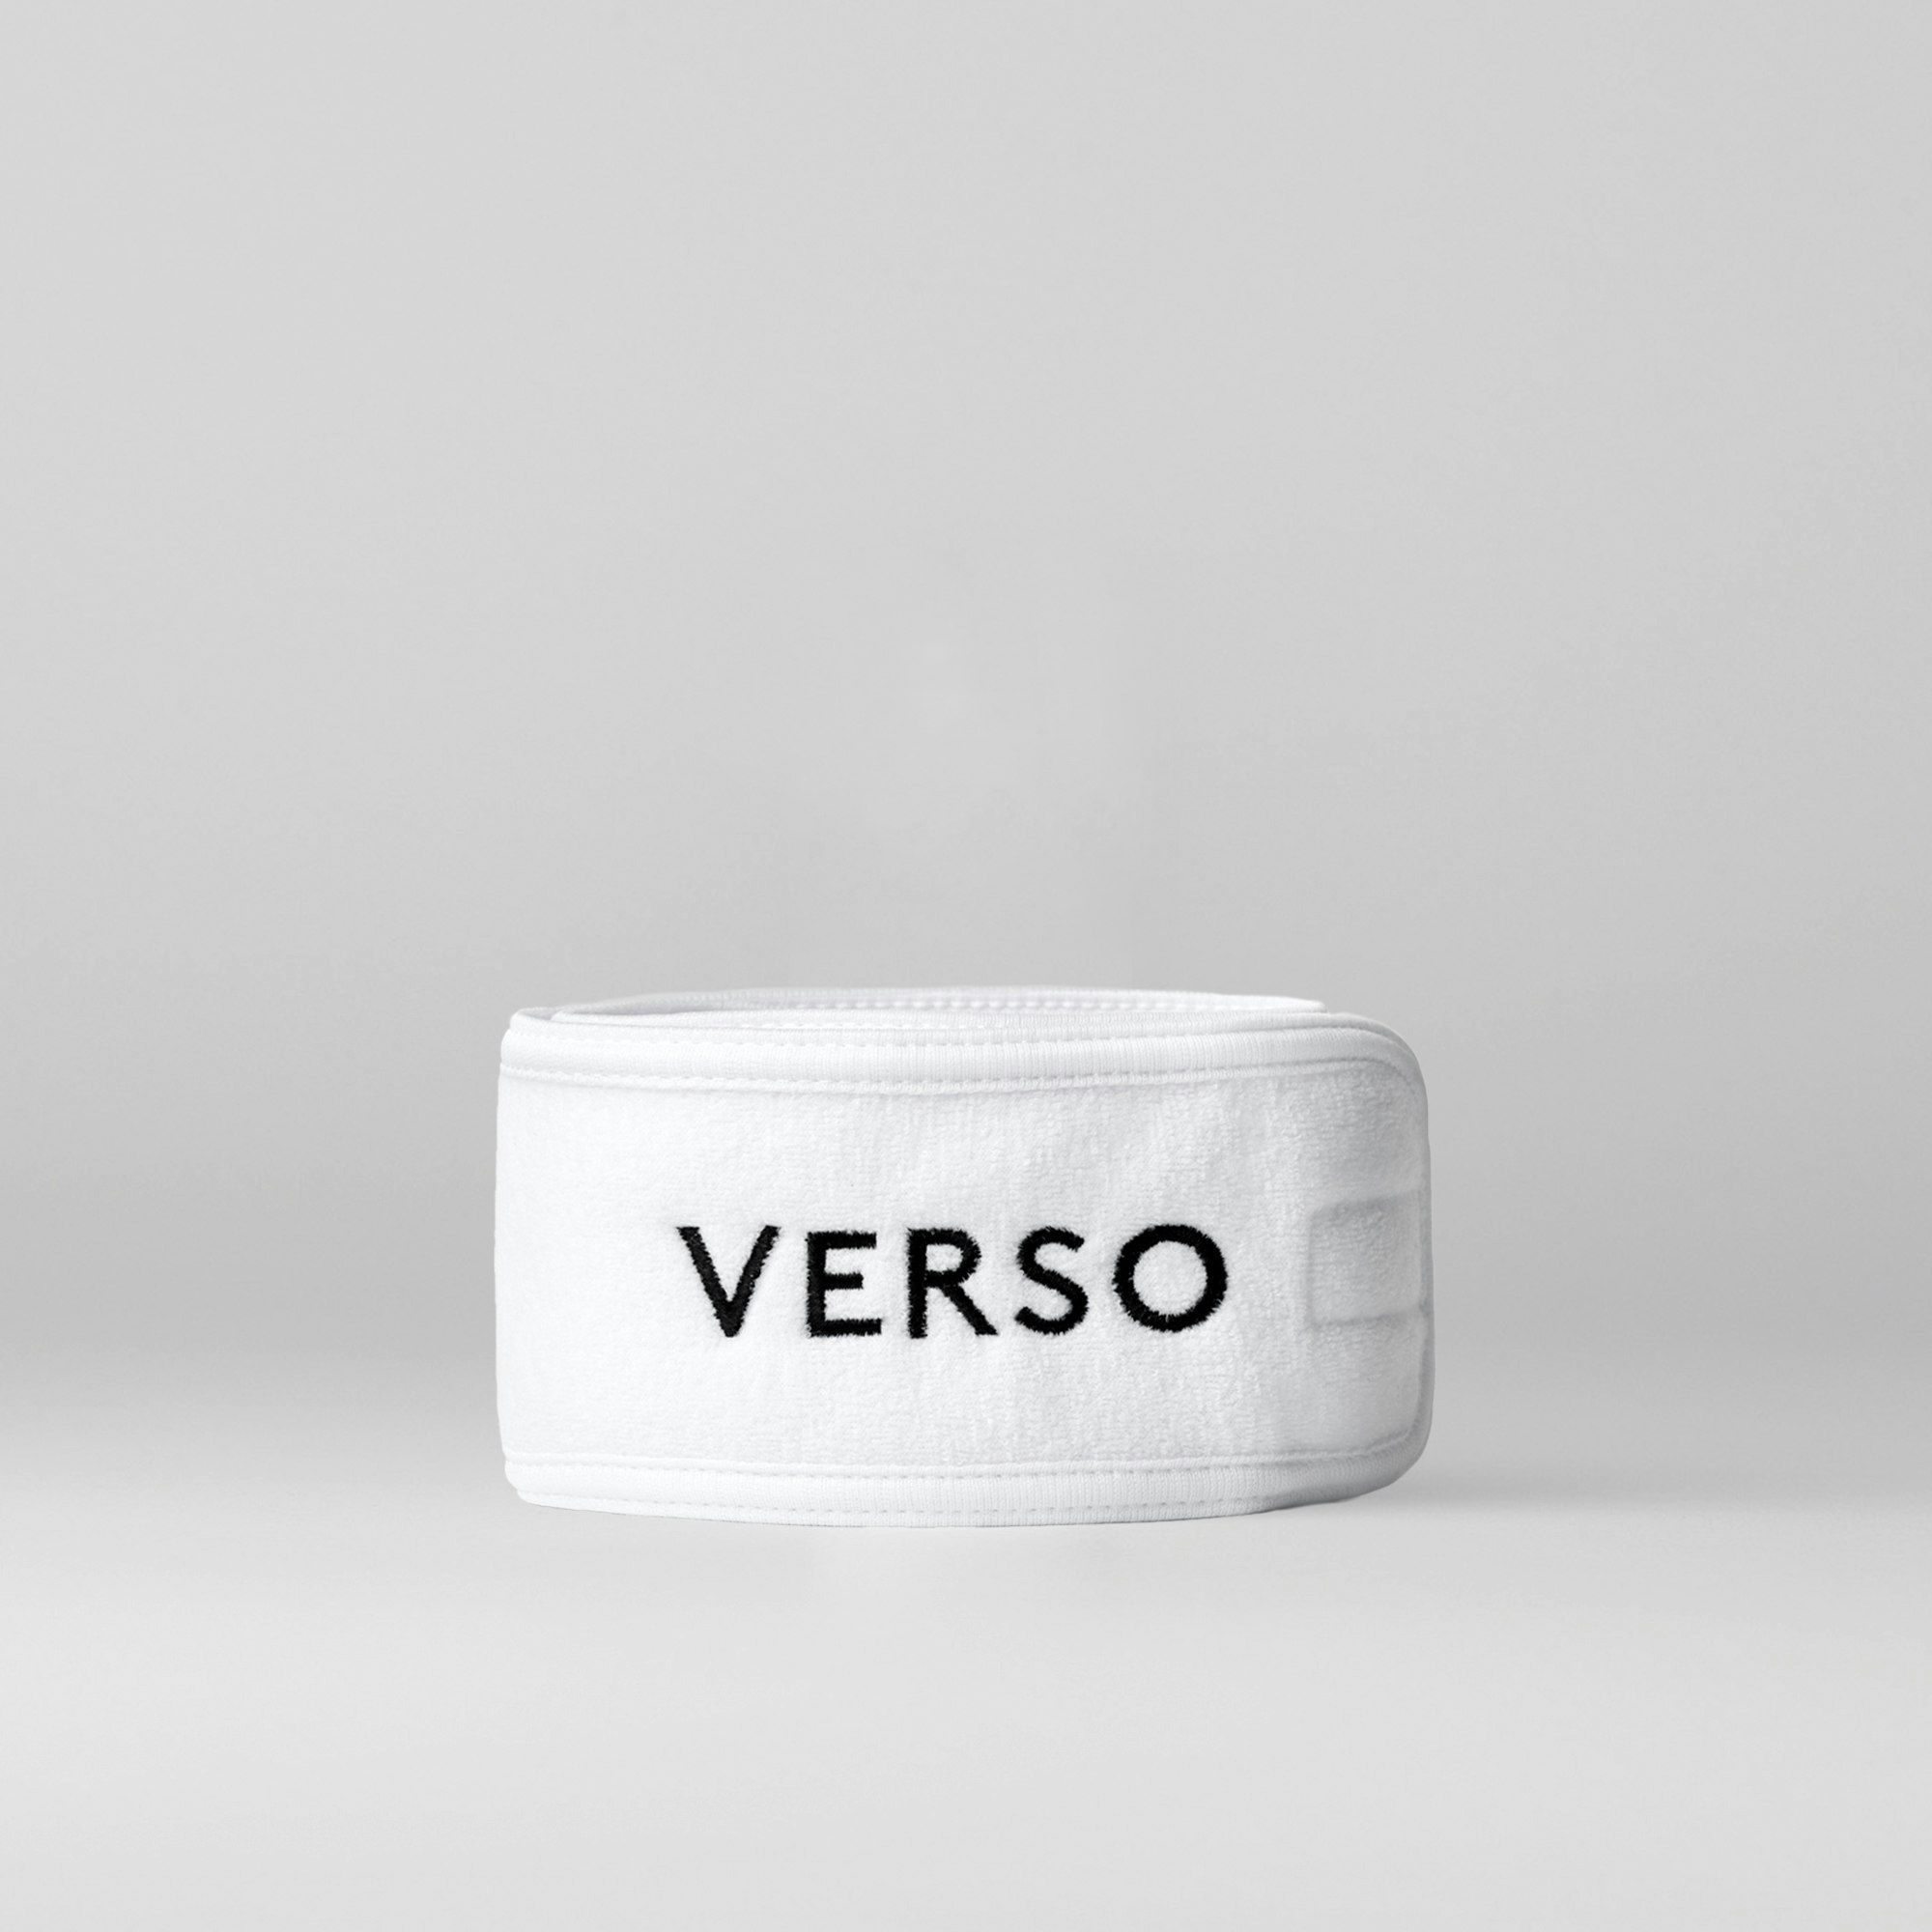 Verso Body Collection Discovery Kit